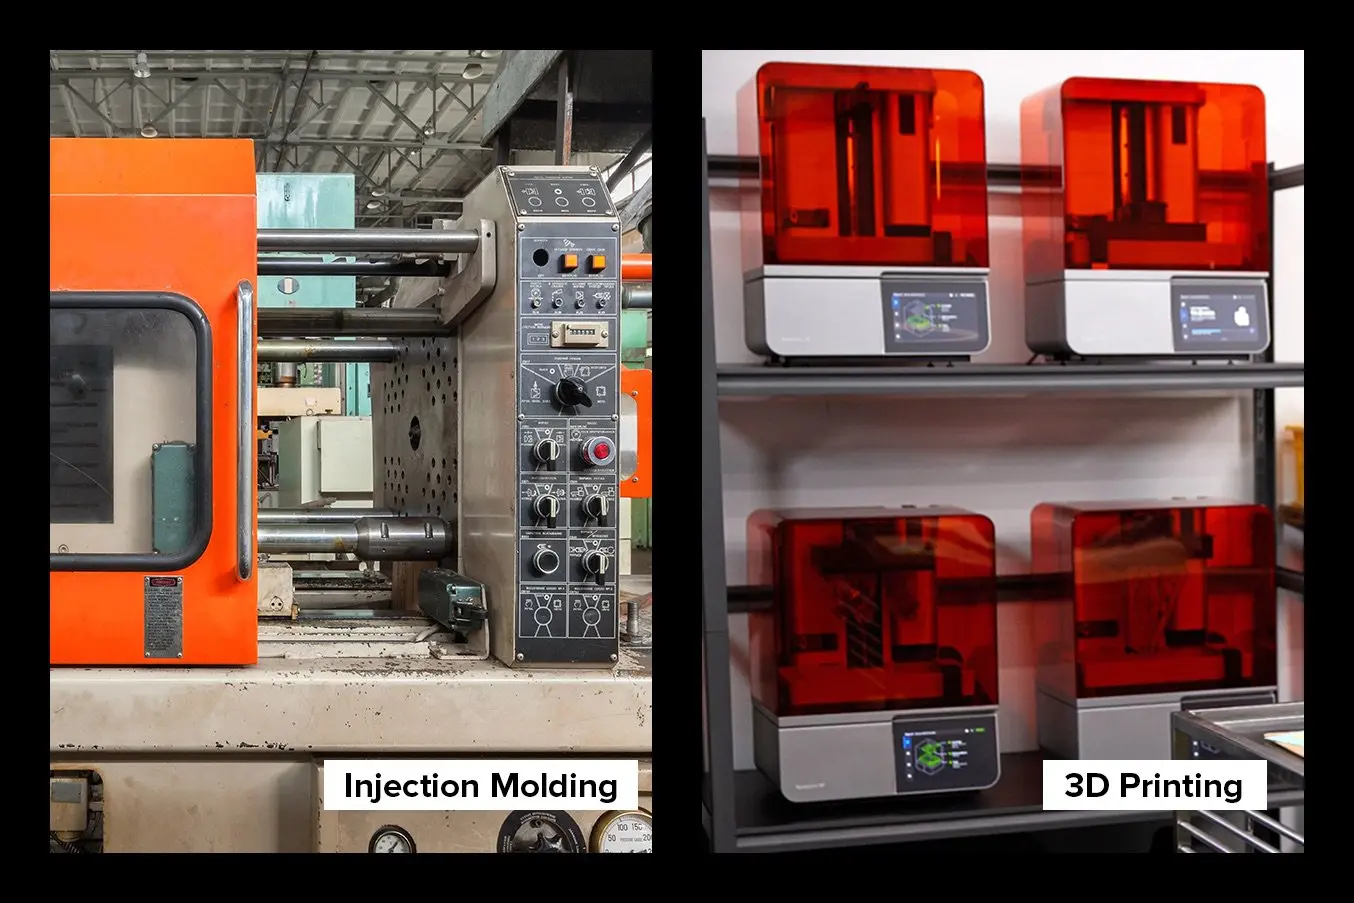 Form 4 vs. injection molding